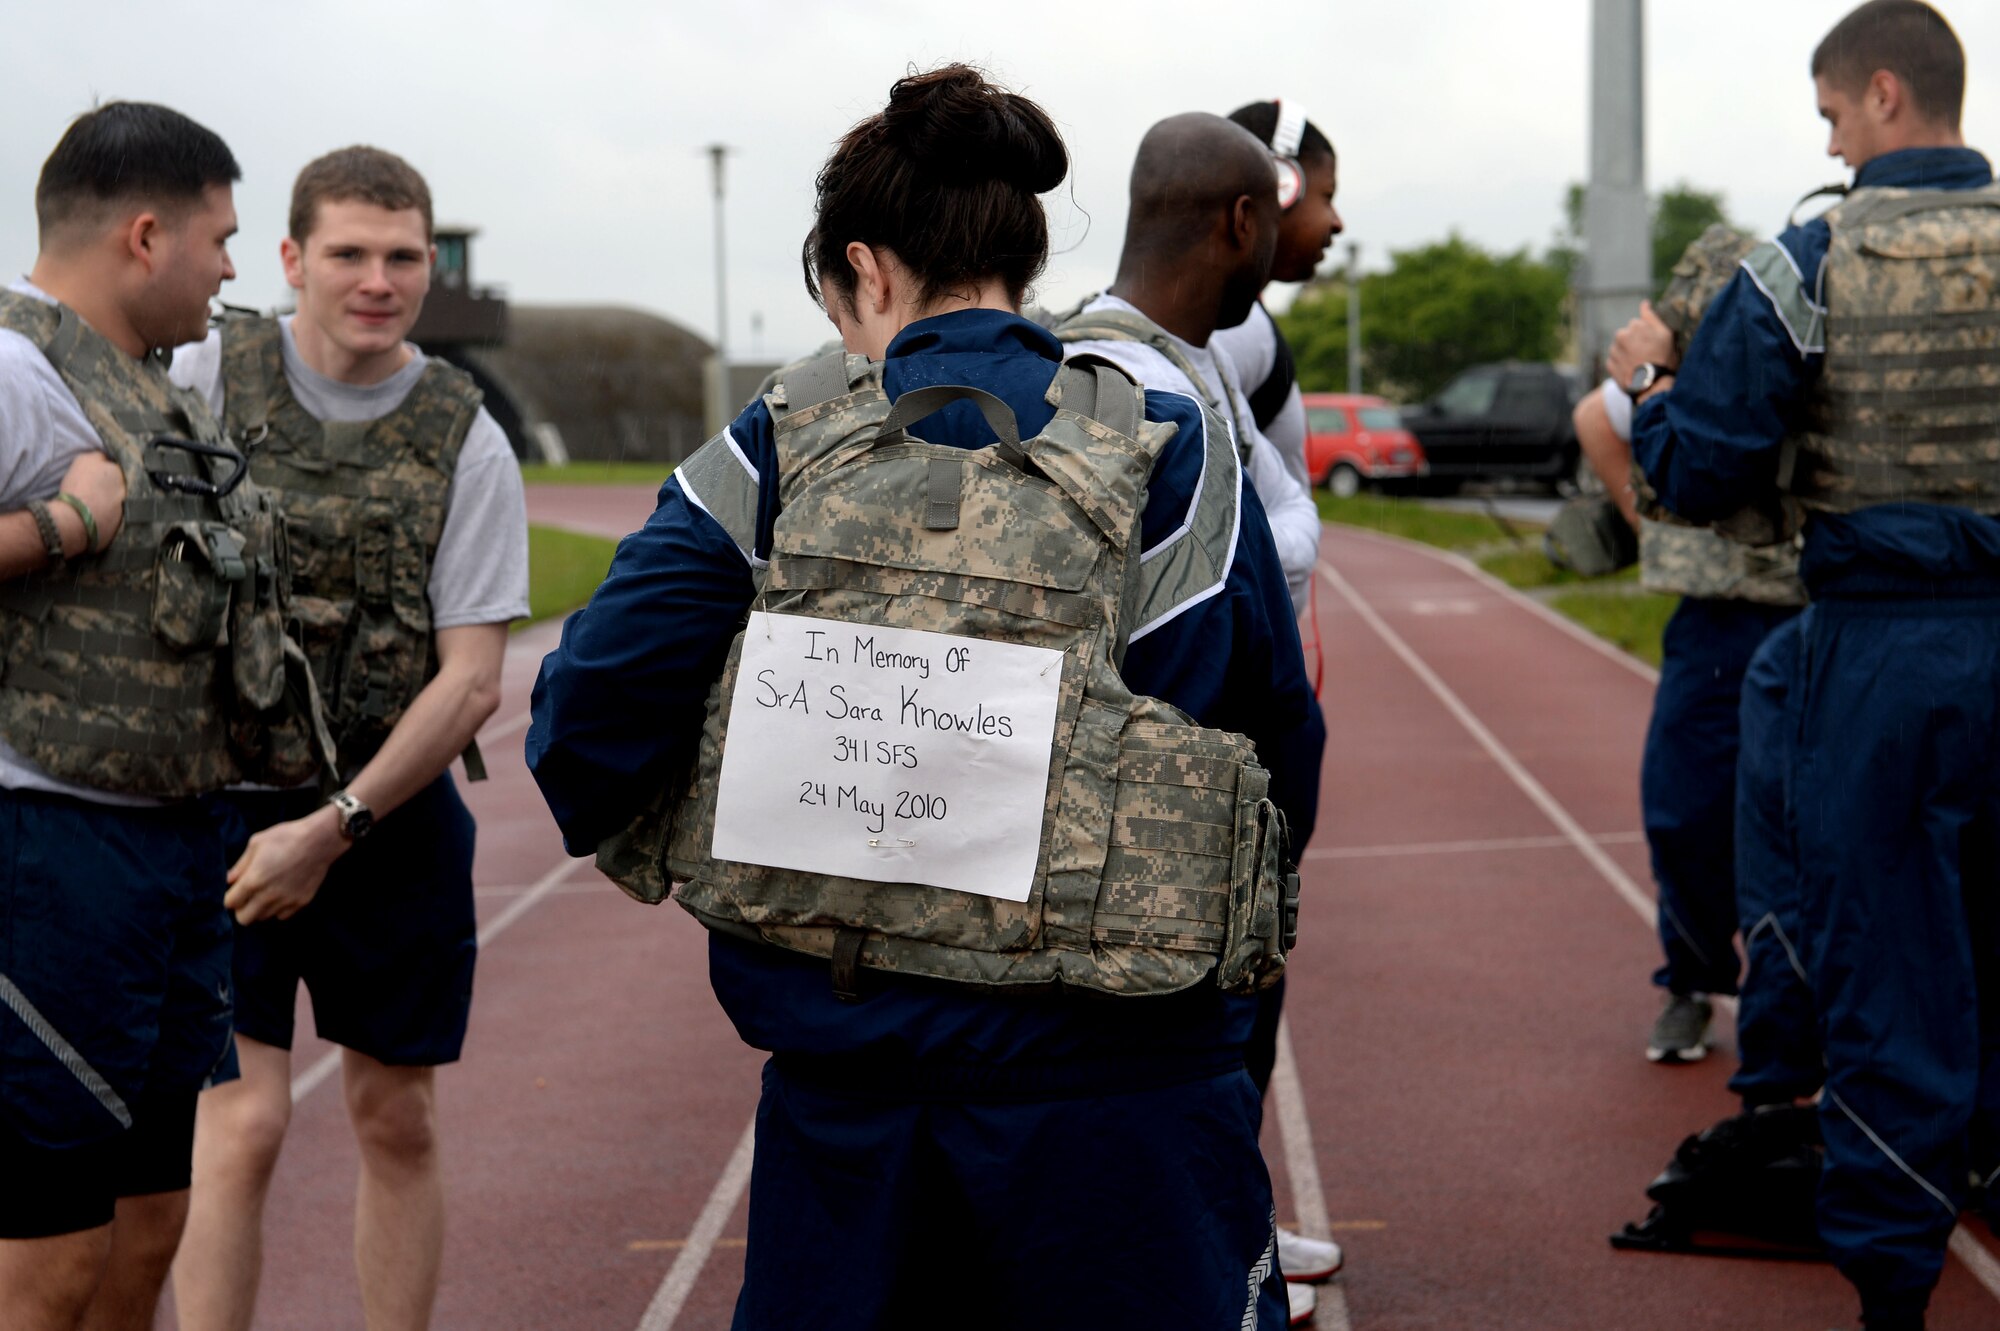 U.S. Air Force Staff Sgt. Elizabeth Puls, 52nd Security Forces Squadron patrolman from Cedaredge, Co., displays the name of a fallen defender, Senior Airman Sara Knowles, on her bullet-proof vest before the 10-kilometer Security Forces Memorial Ruck March at Spangdahlem Air Base, Germany, May 12, 2014. The march was held in remembrance of all fallen security forces and police officers as part of National Police Week. (U.S. Air Force photo by Senior Airman Alexis Siekert)